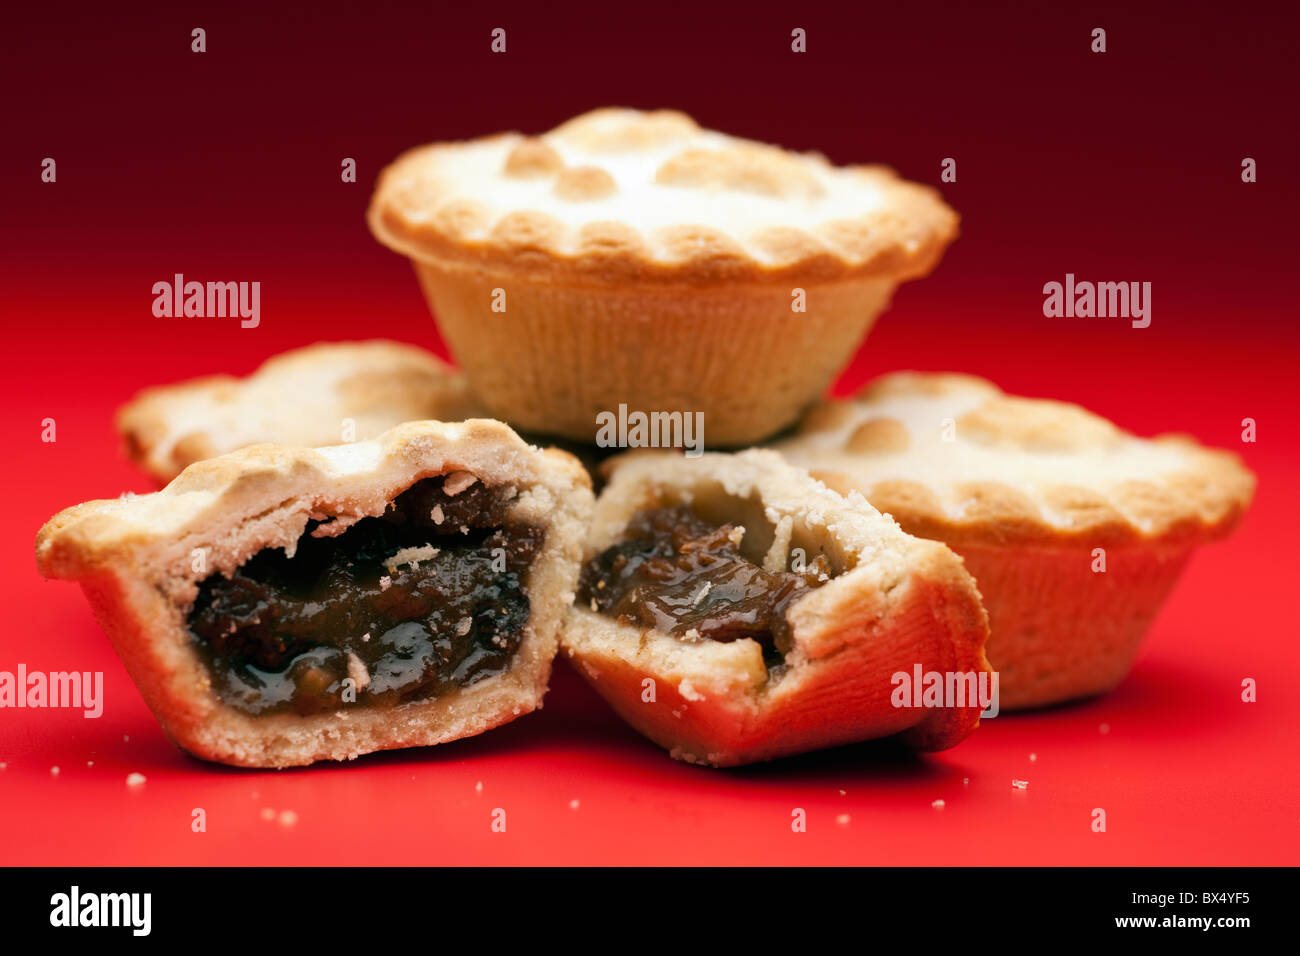 Pile of mince pies on a Graduated  Red Background Stock Photo